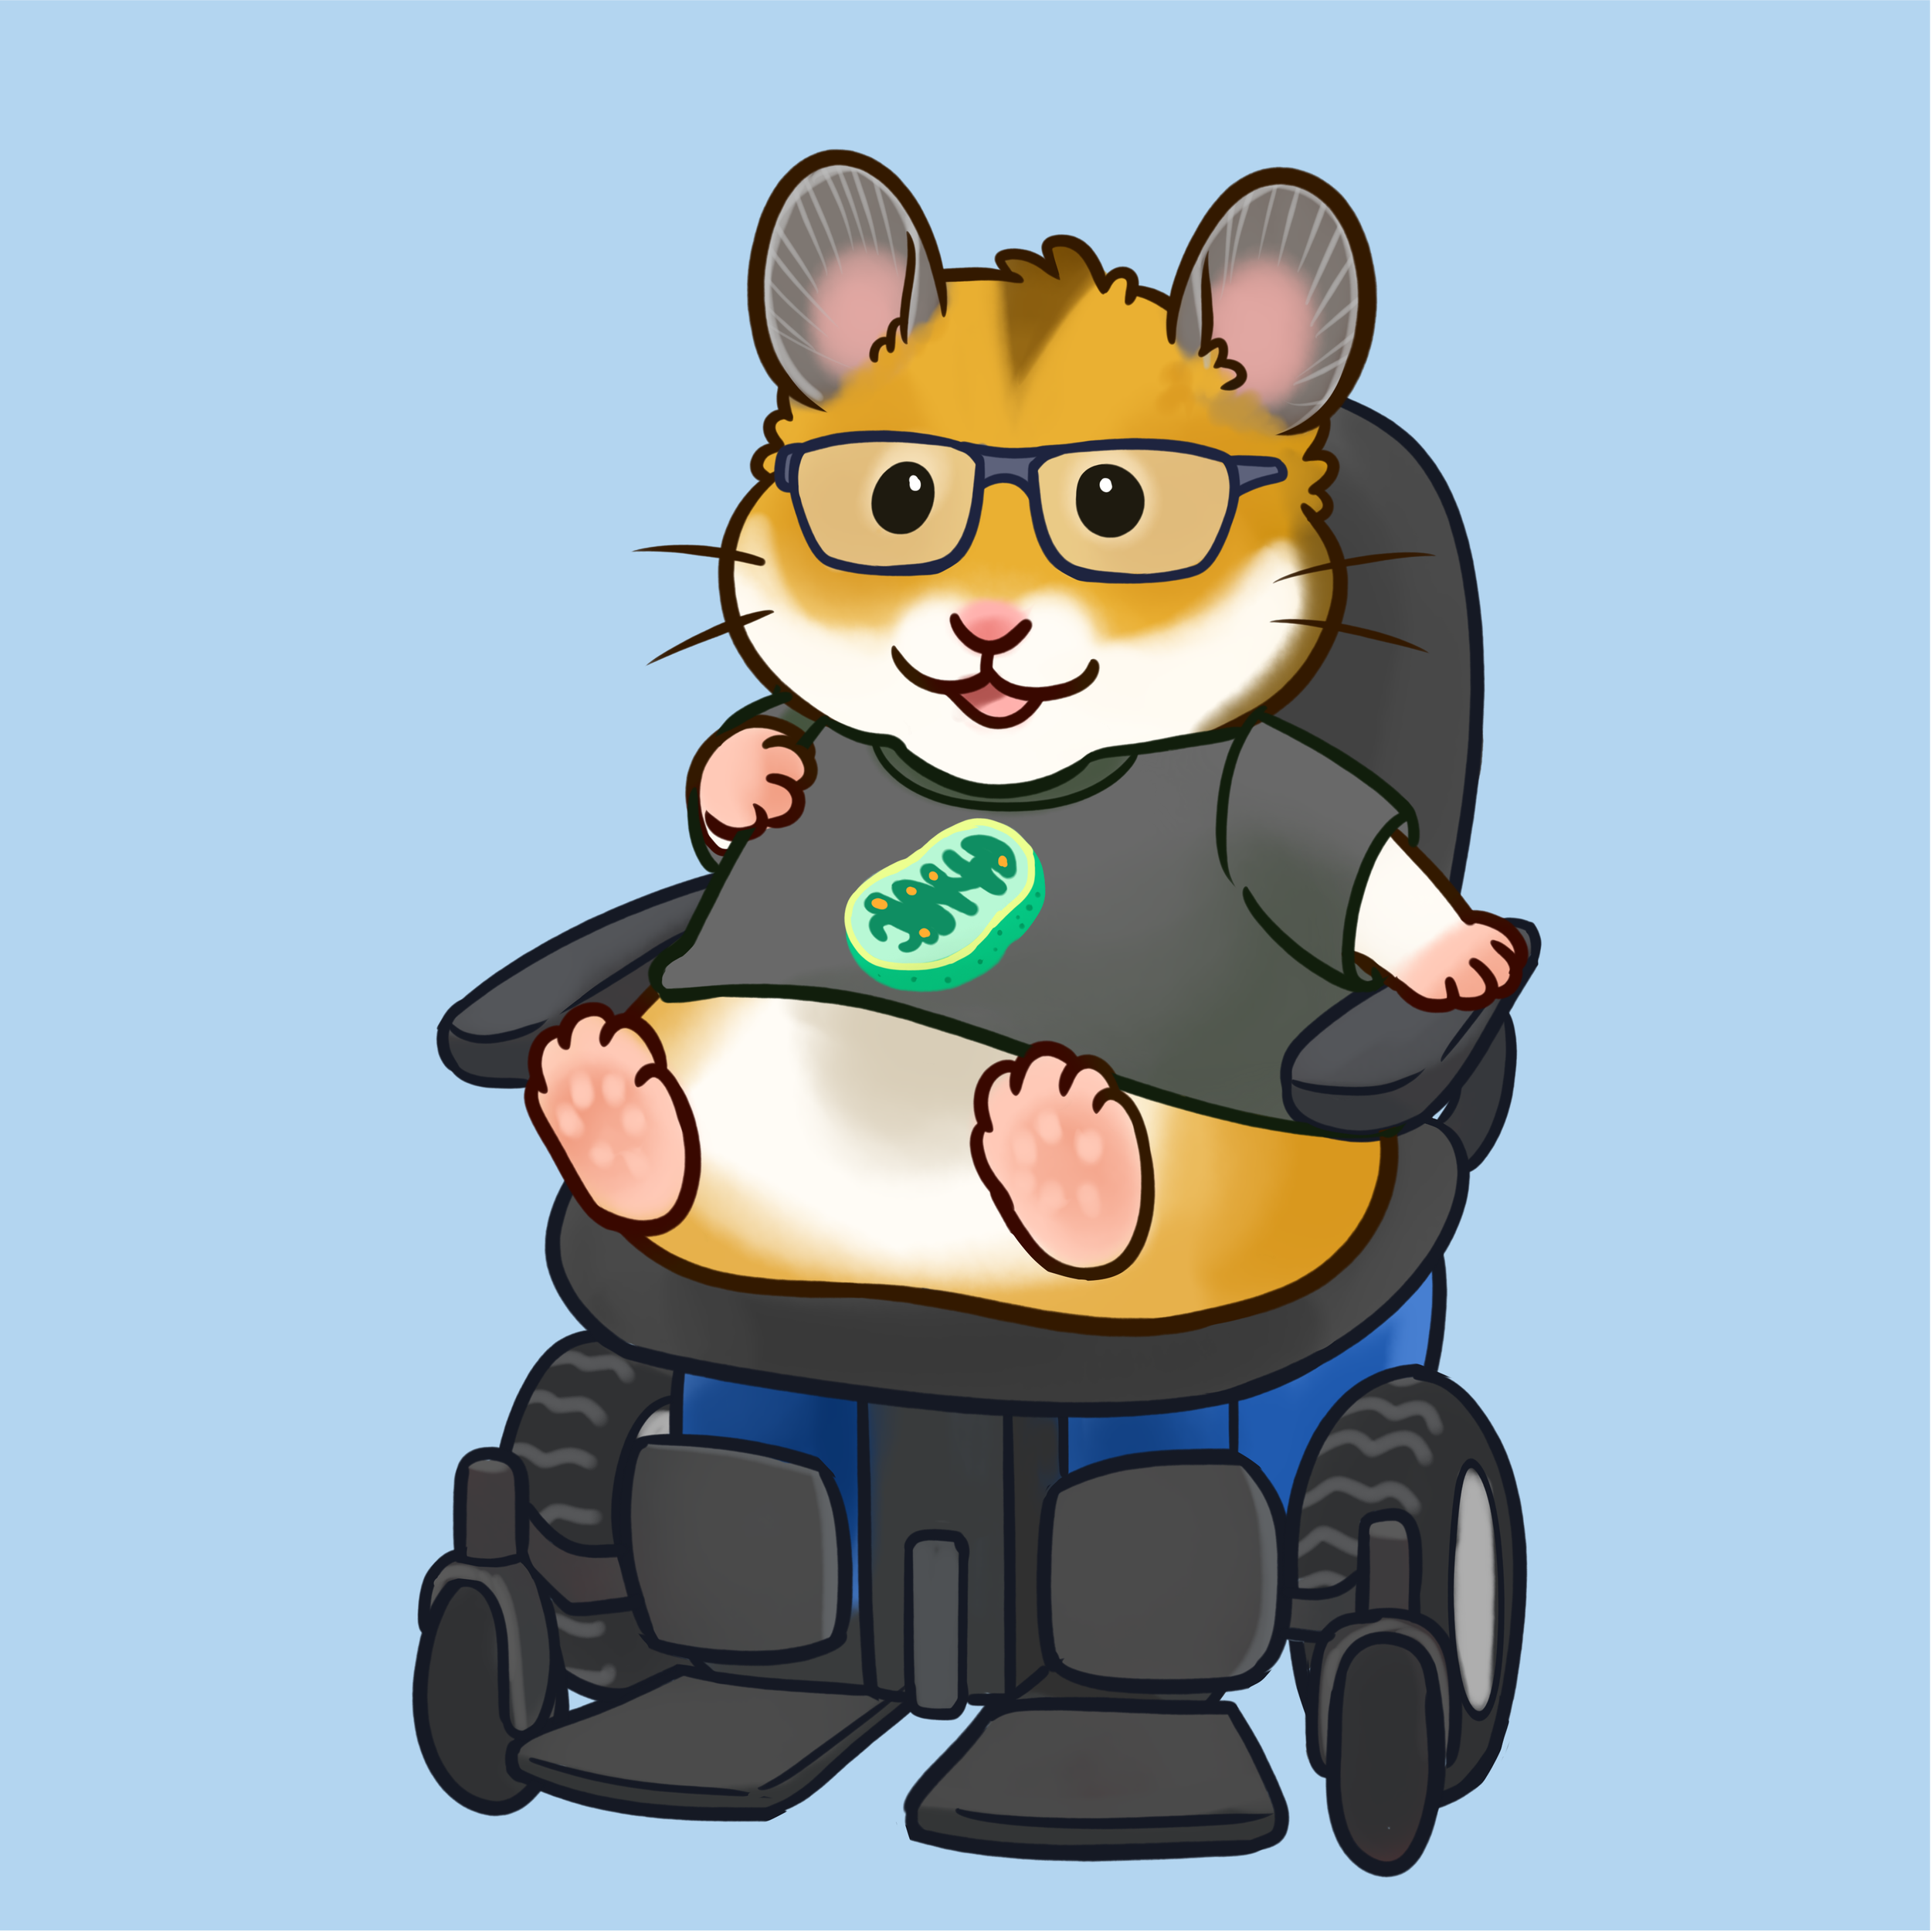 The Pipsqueakery mascot hamster in a wheelchair